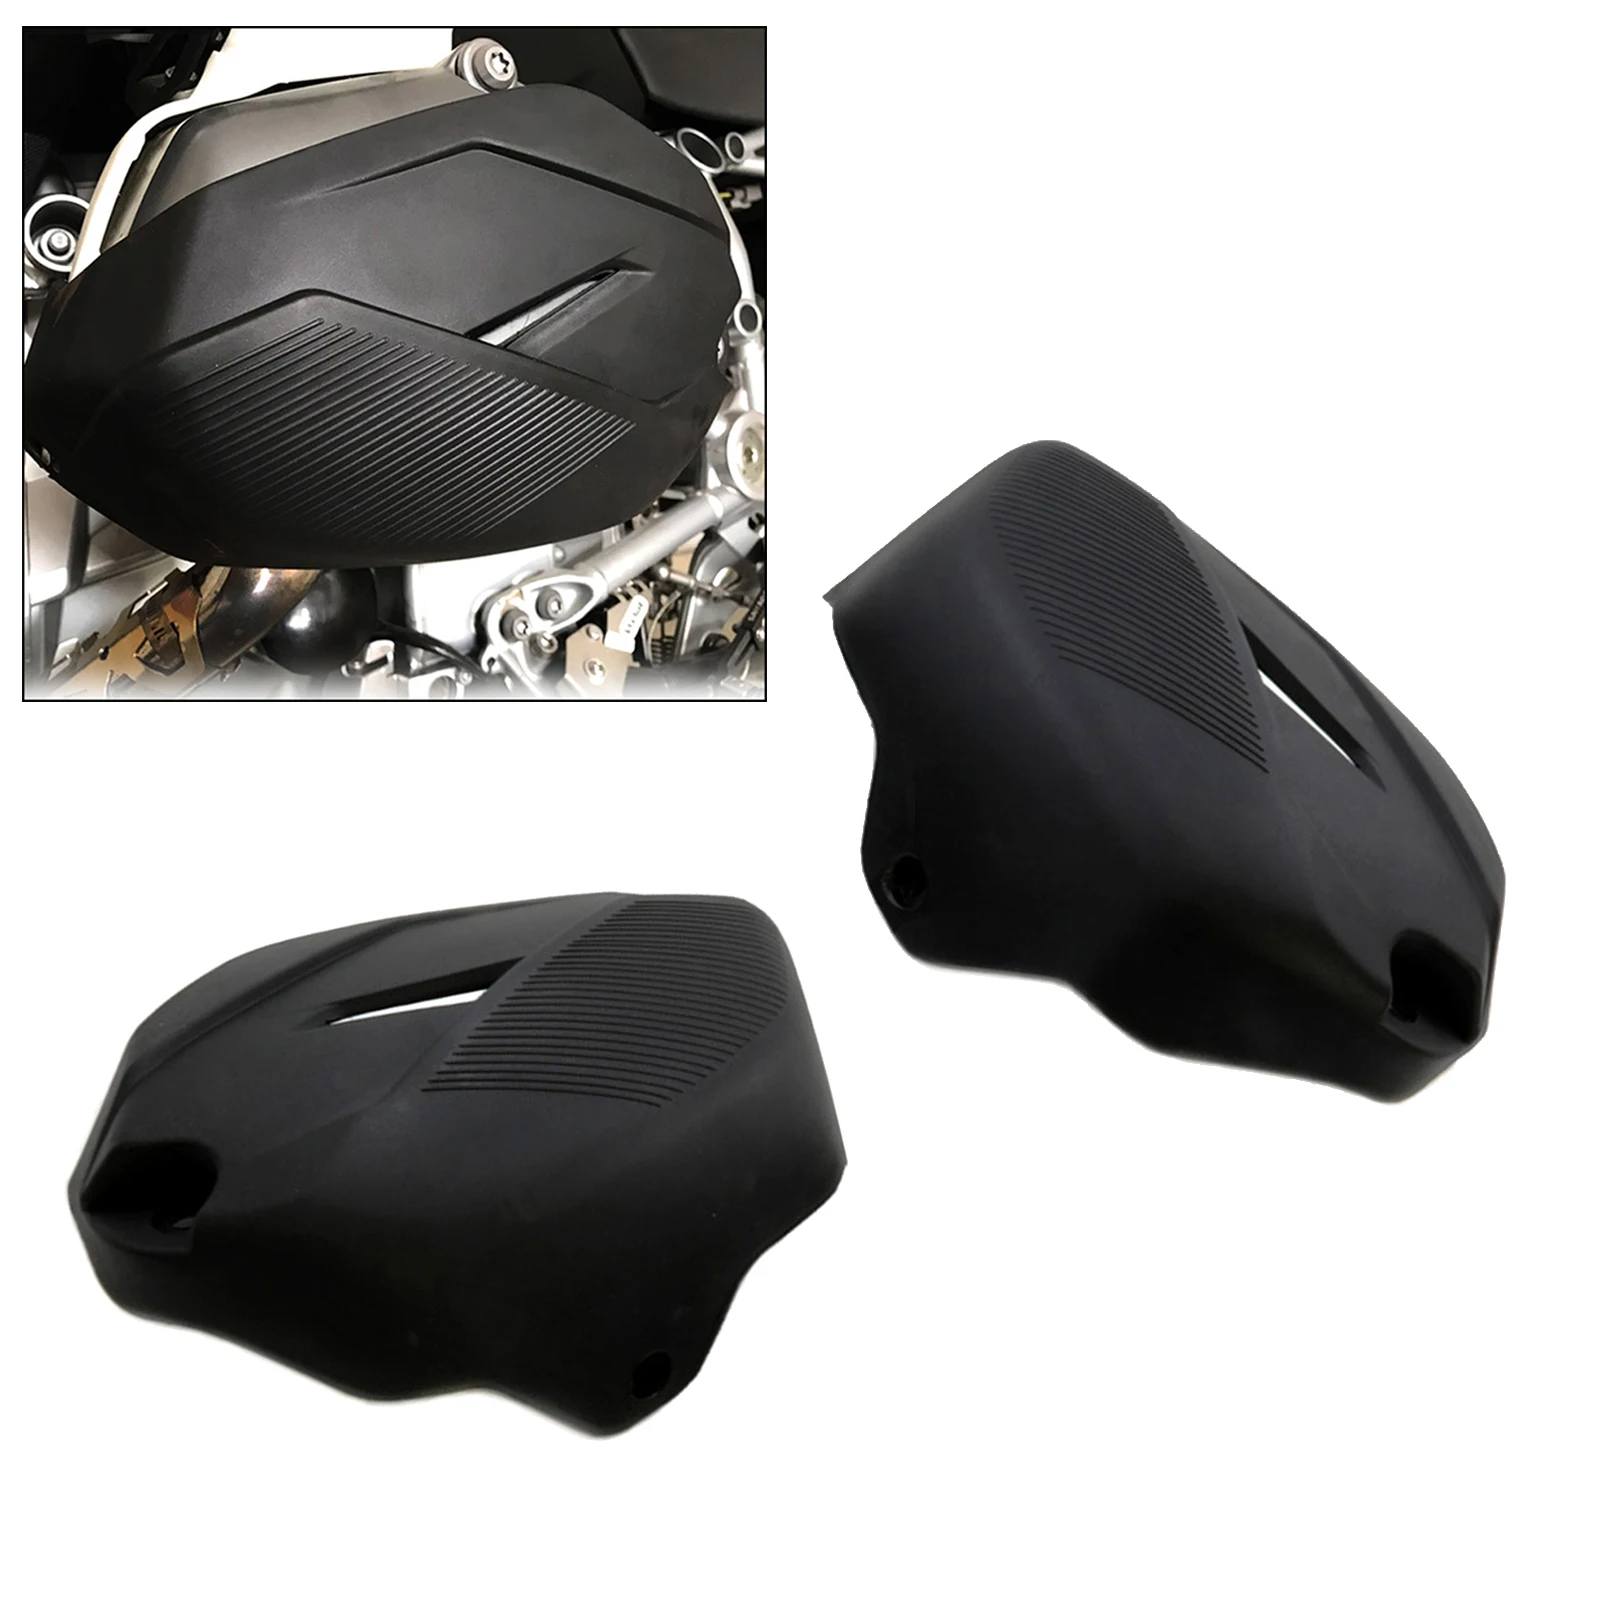 2Pcs Motorcycle Cylinder Head Engine Guards Cover Replacement for  R1200GS LC Adventure R1200R R1200RT 2014-2017